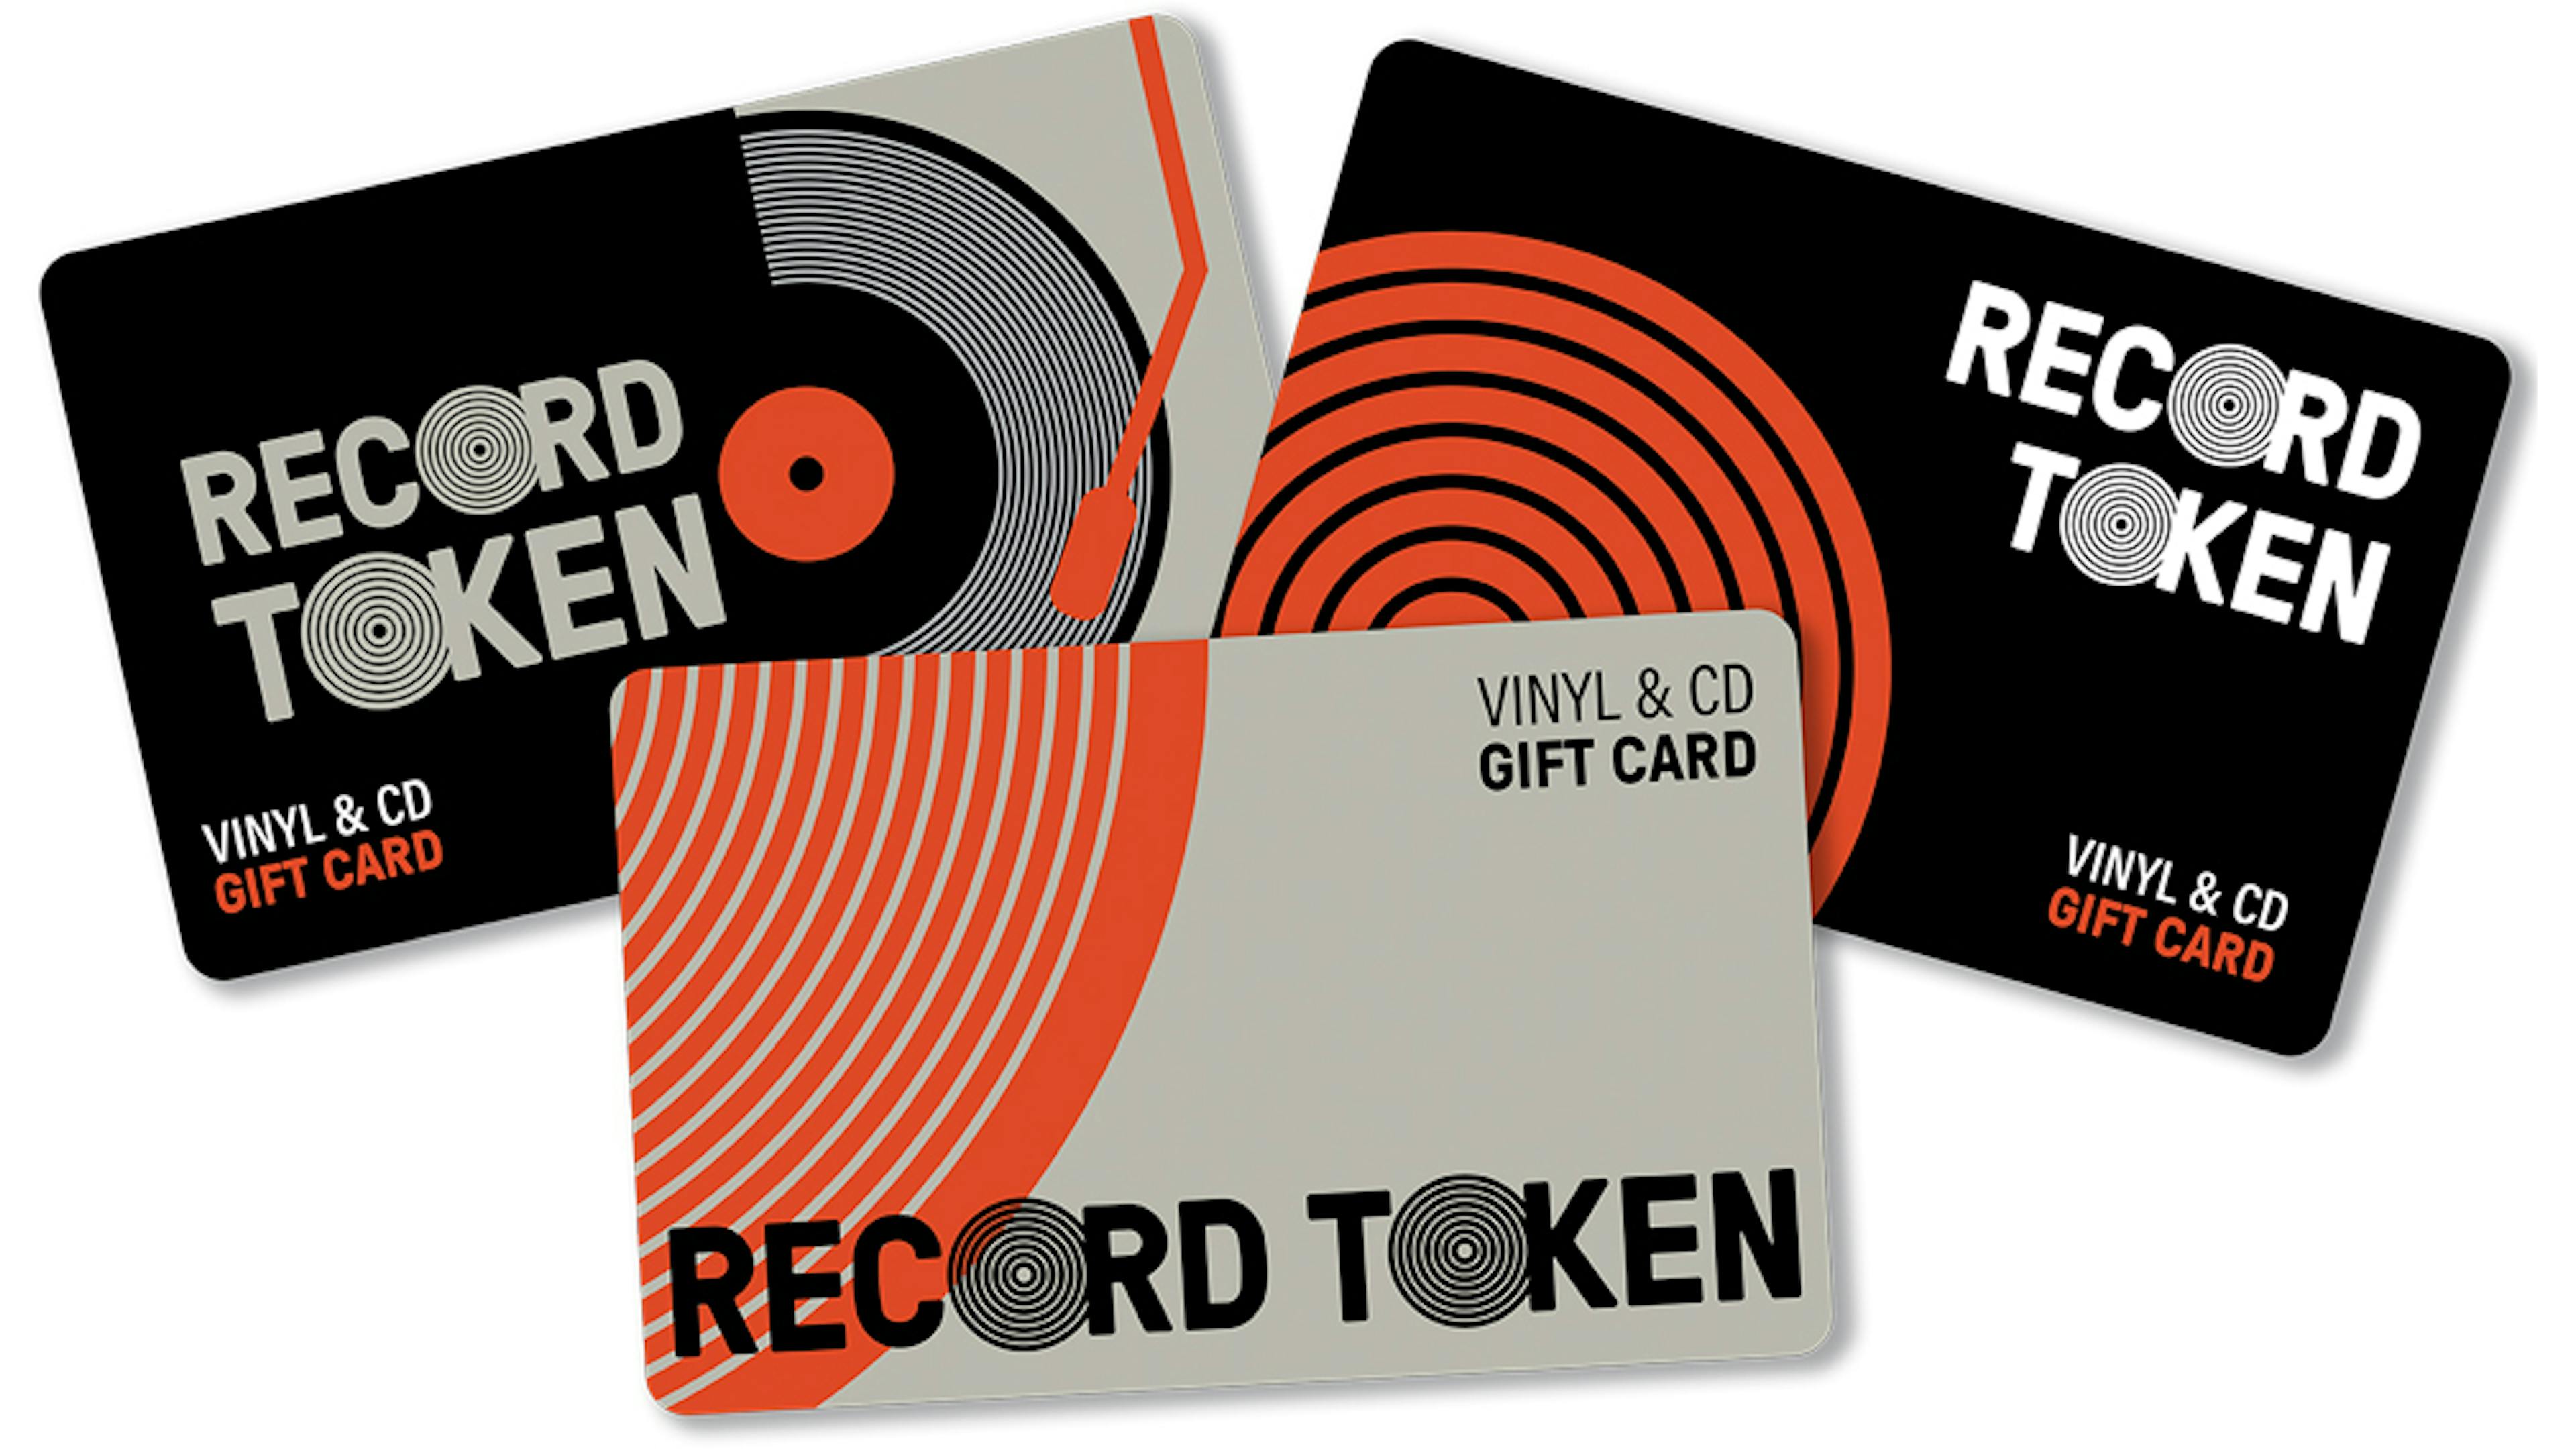 Win £100 Of Record Tokens!